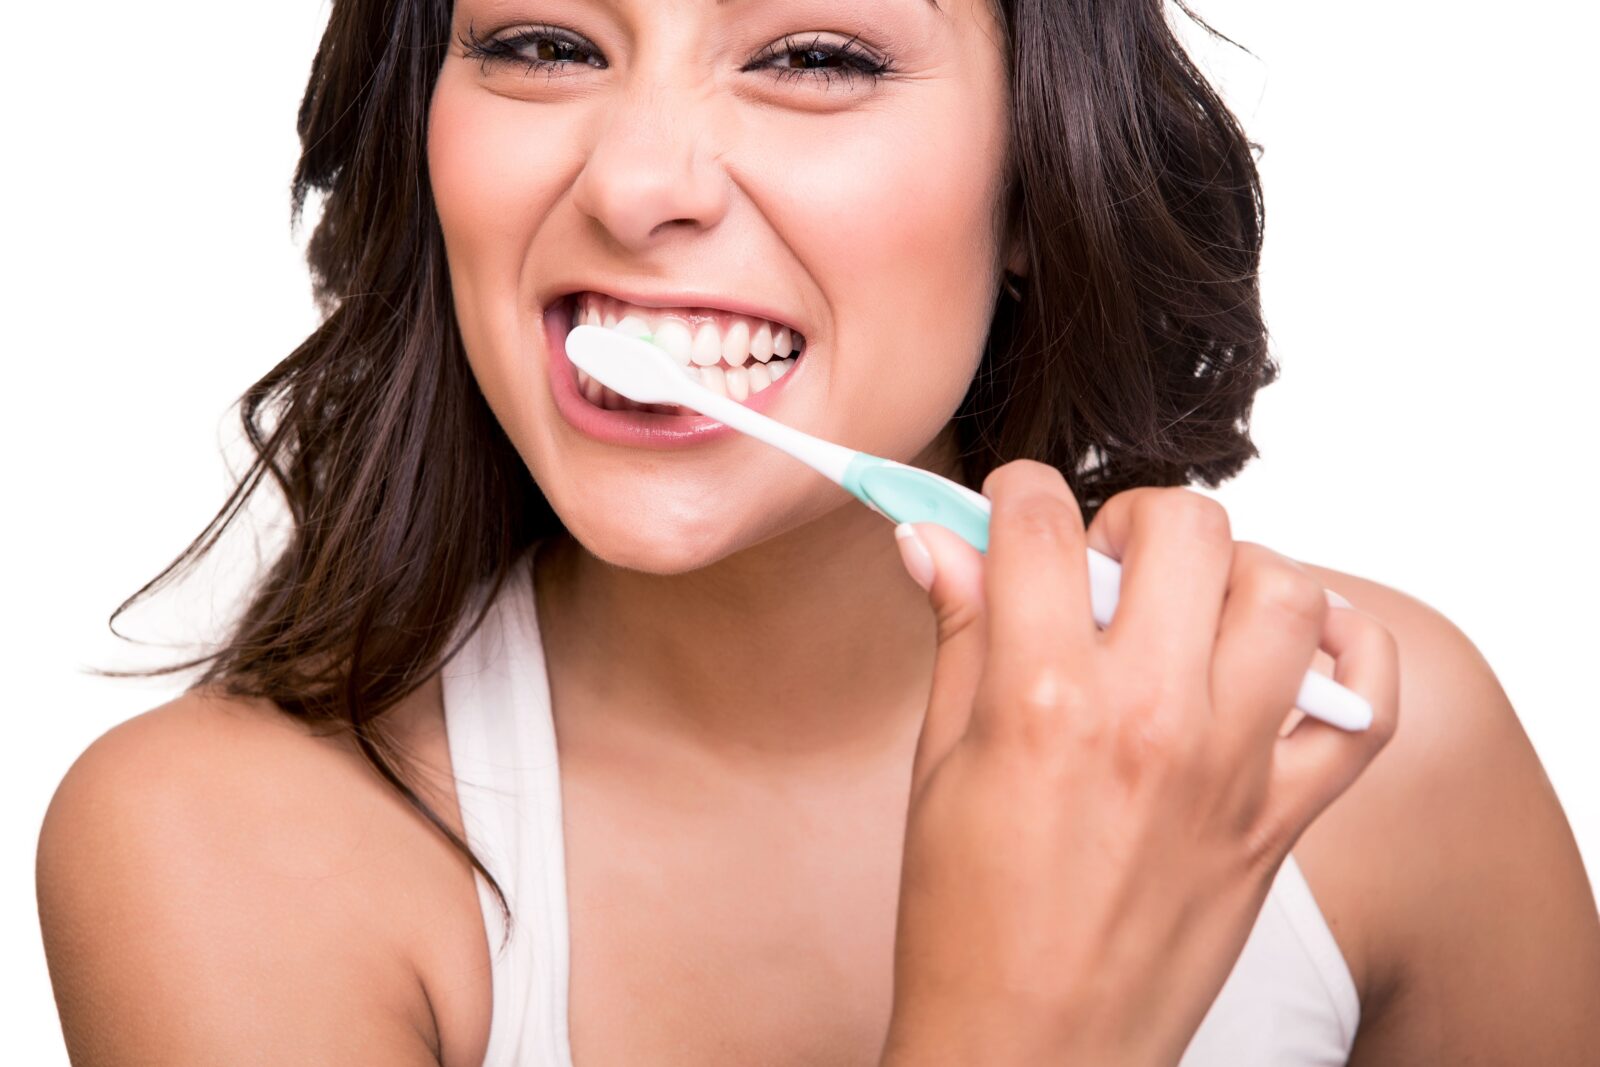 woman smiling and brushing her teeth